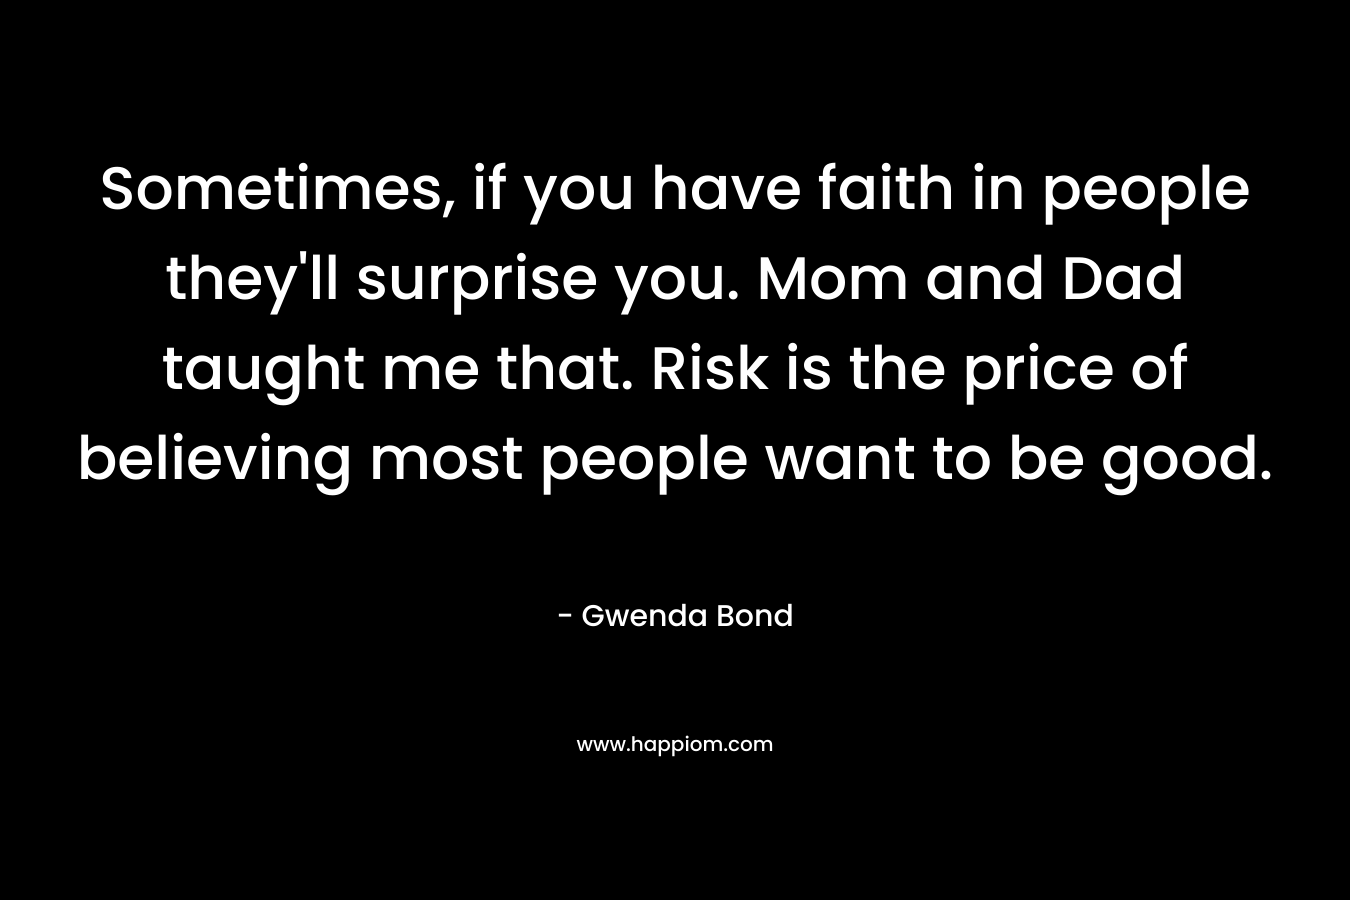 Sometimes, if you have faith in people they’ll surprise you. Mom and Dad taught me that. Risk is the price of believing most people want to be good. – Gwenda Bond